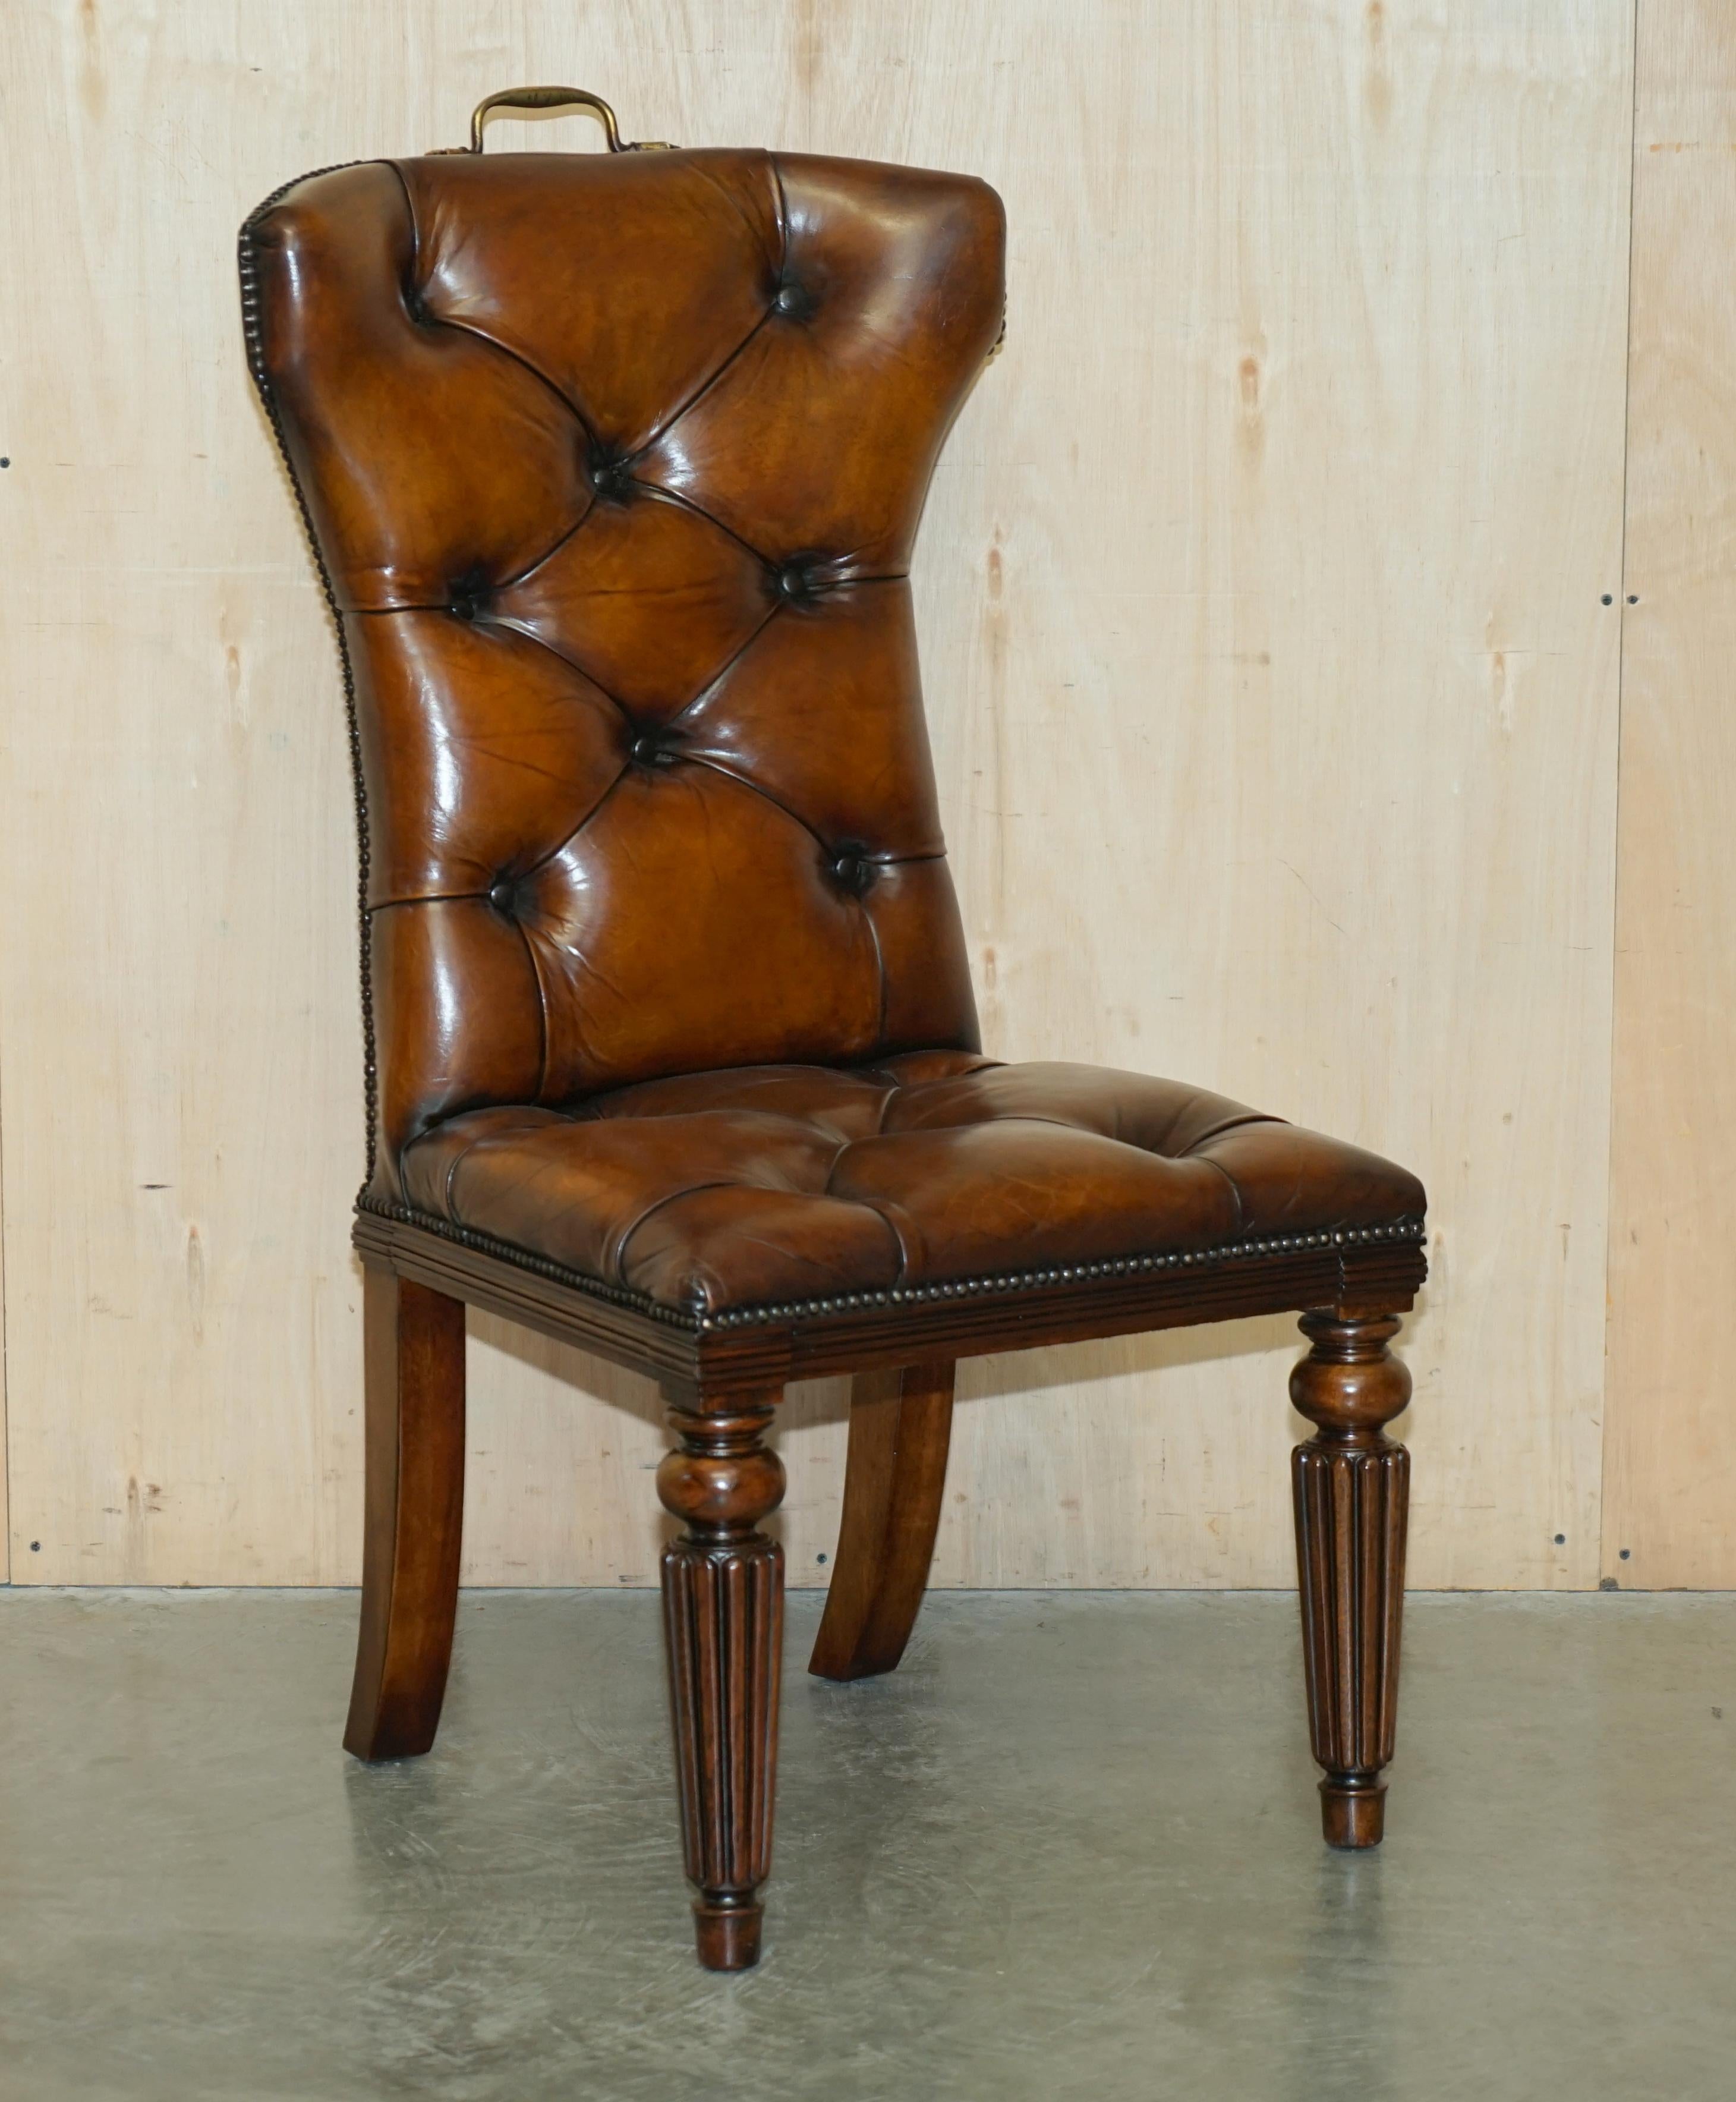 Royal House Antiques

Royal House Antiques is delighted to offer for sale this stunning suite of four Ralph Lauren Telford Art Deco style brown leather dining chairs RRP £24,000  

Please note the delivery fee listed is just a guide, it covers